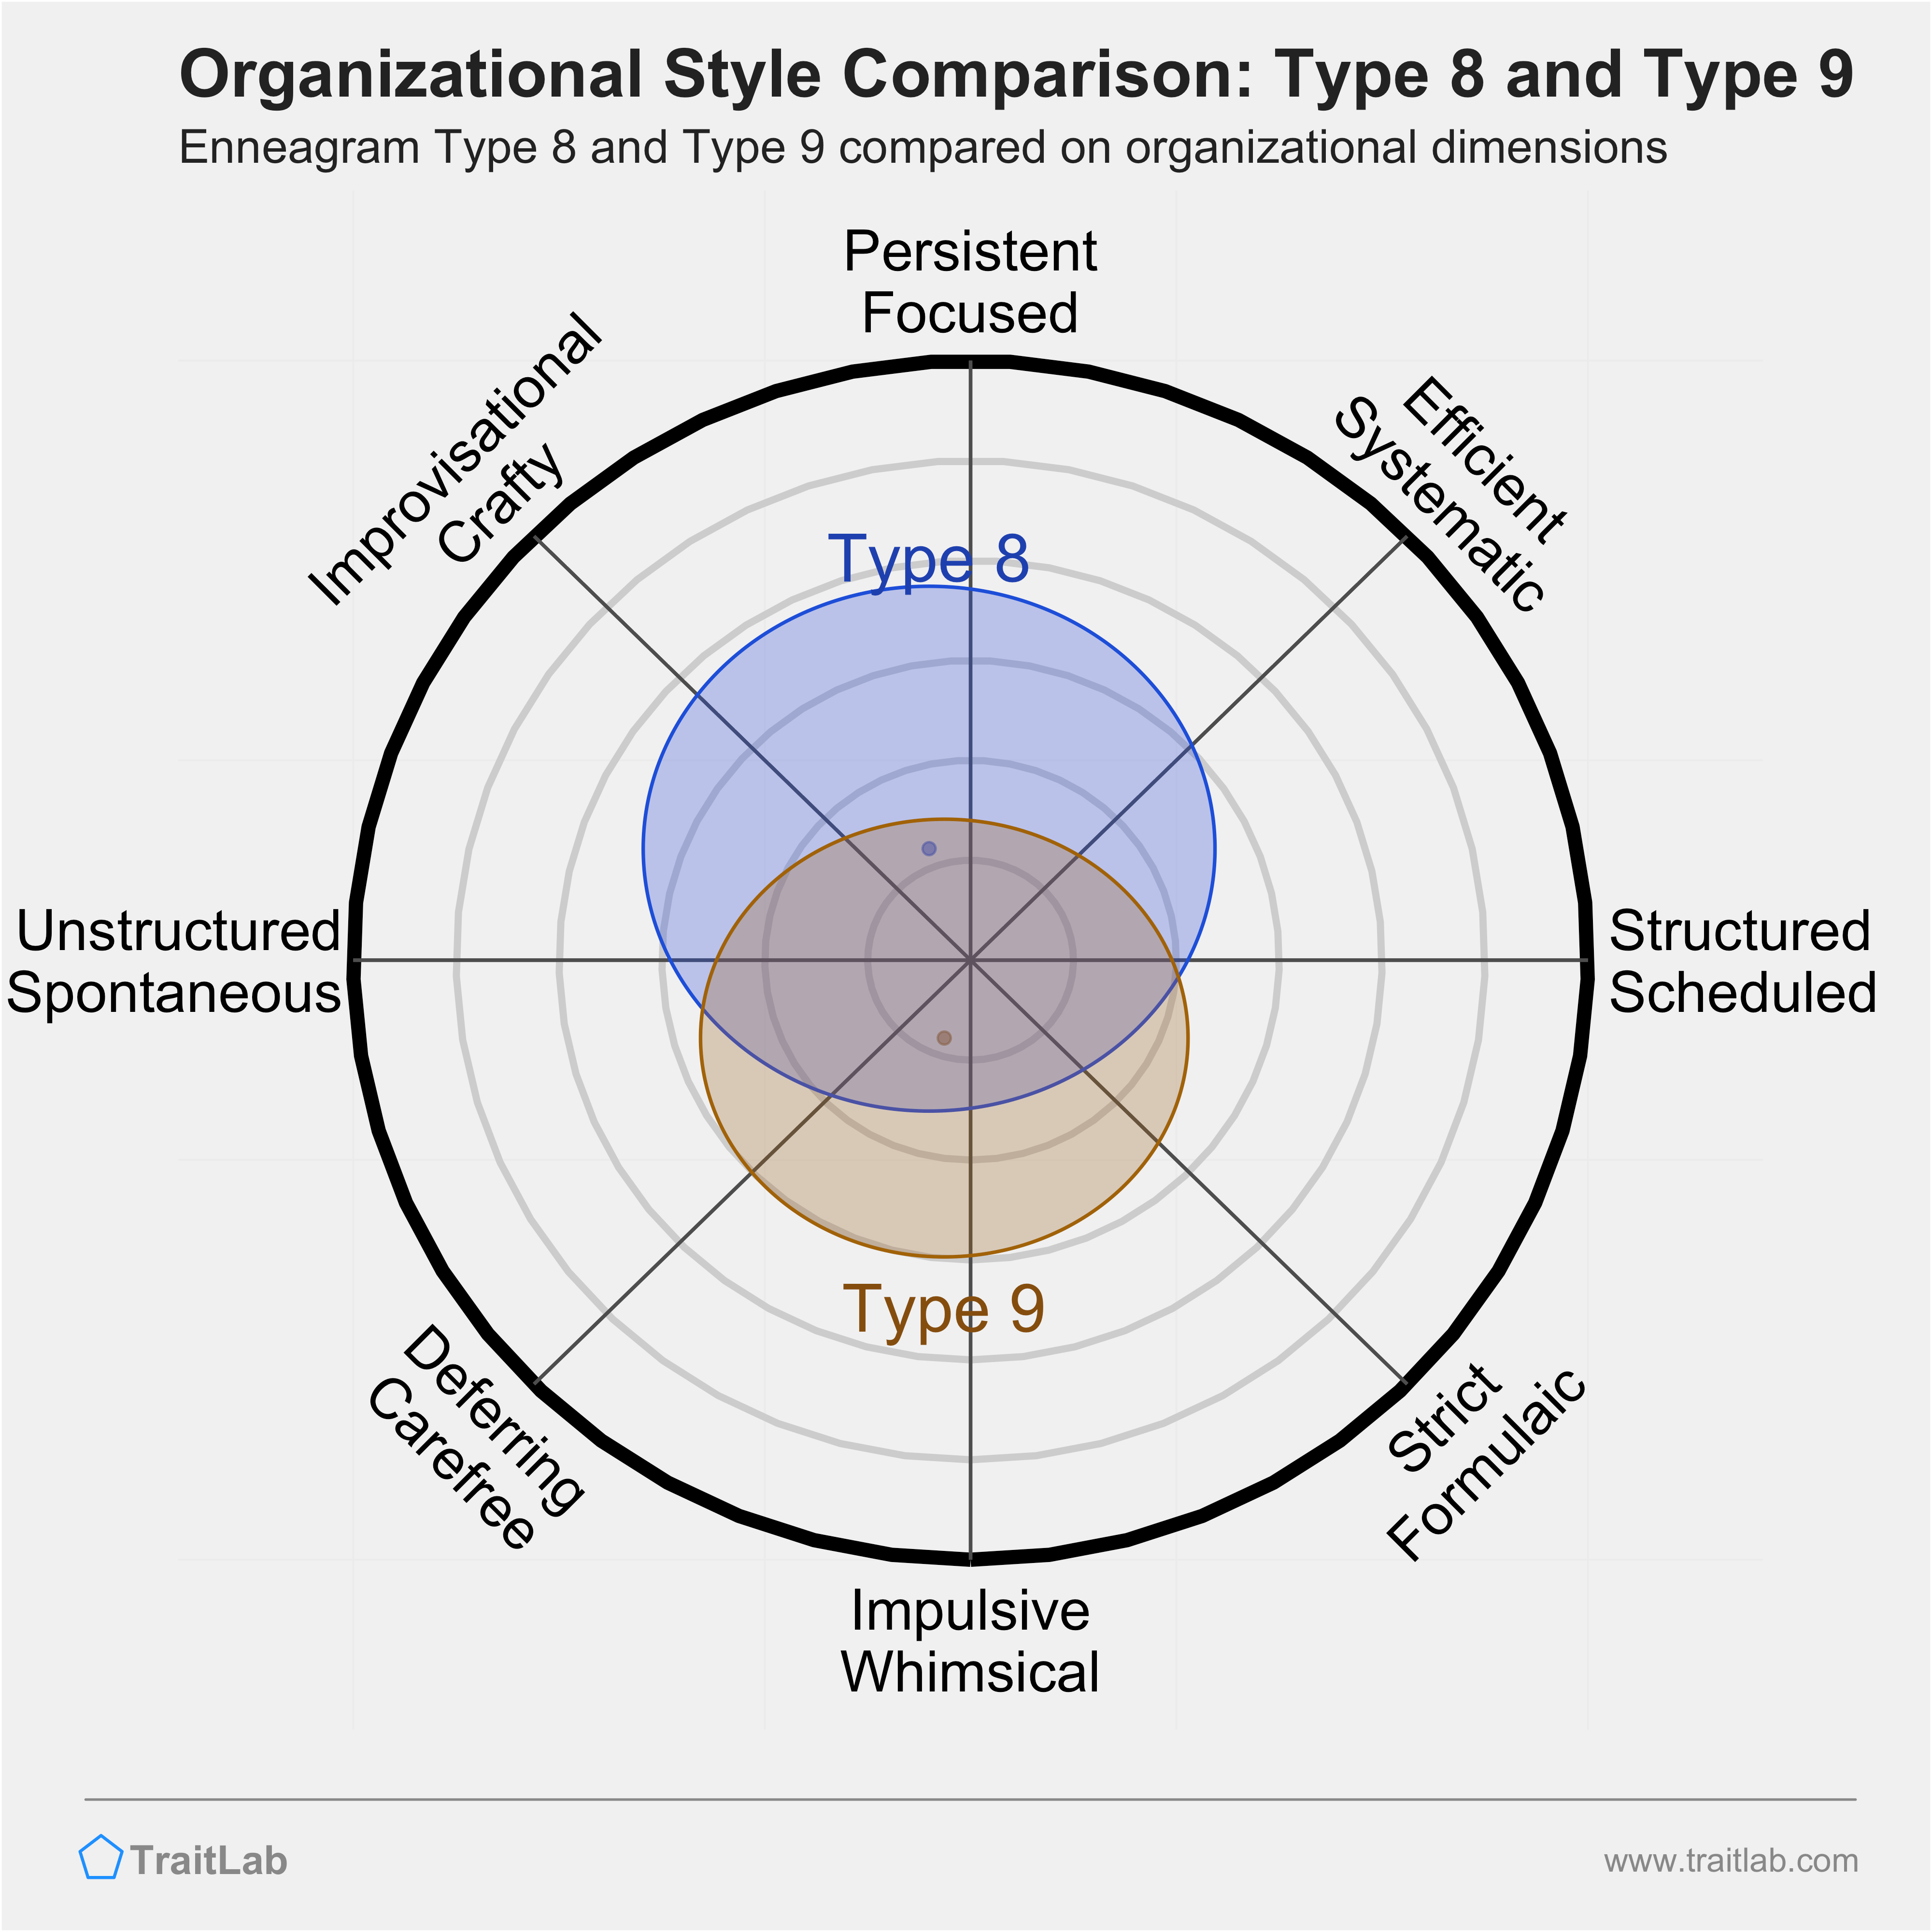 Type 8 and Type 9 comparison across organizational dimensions